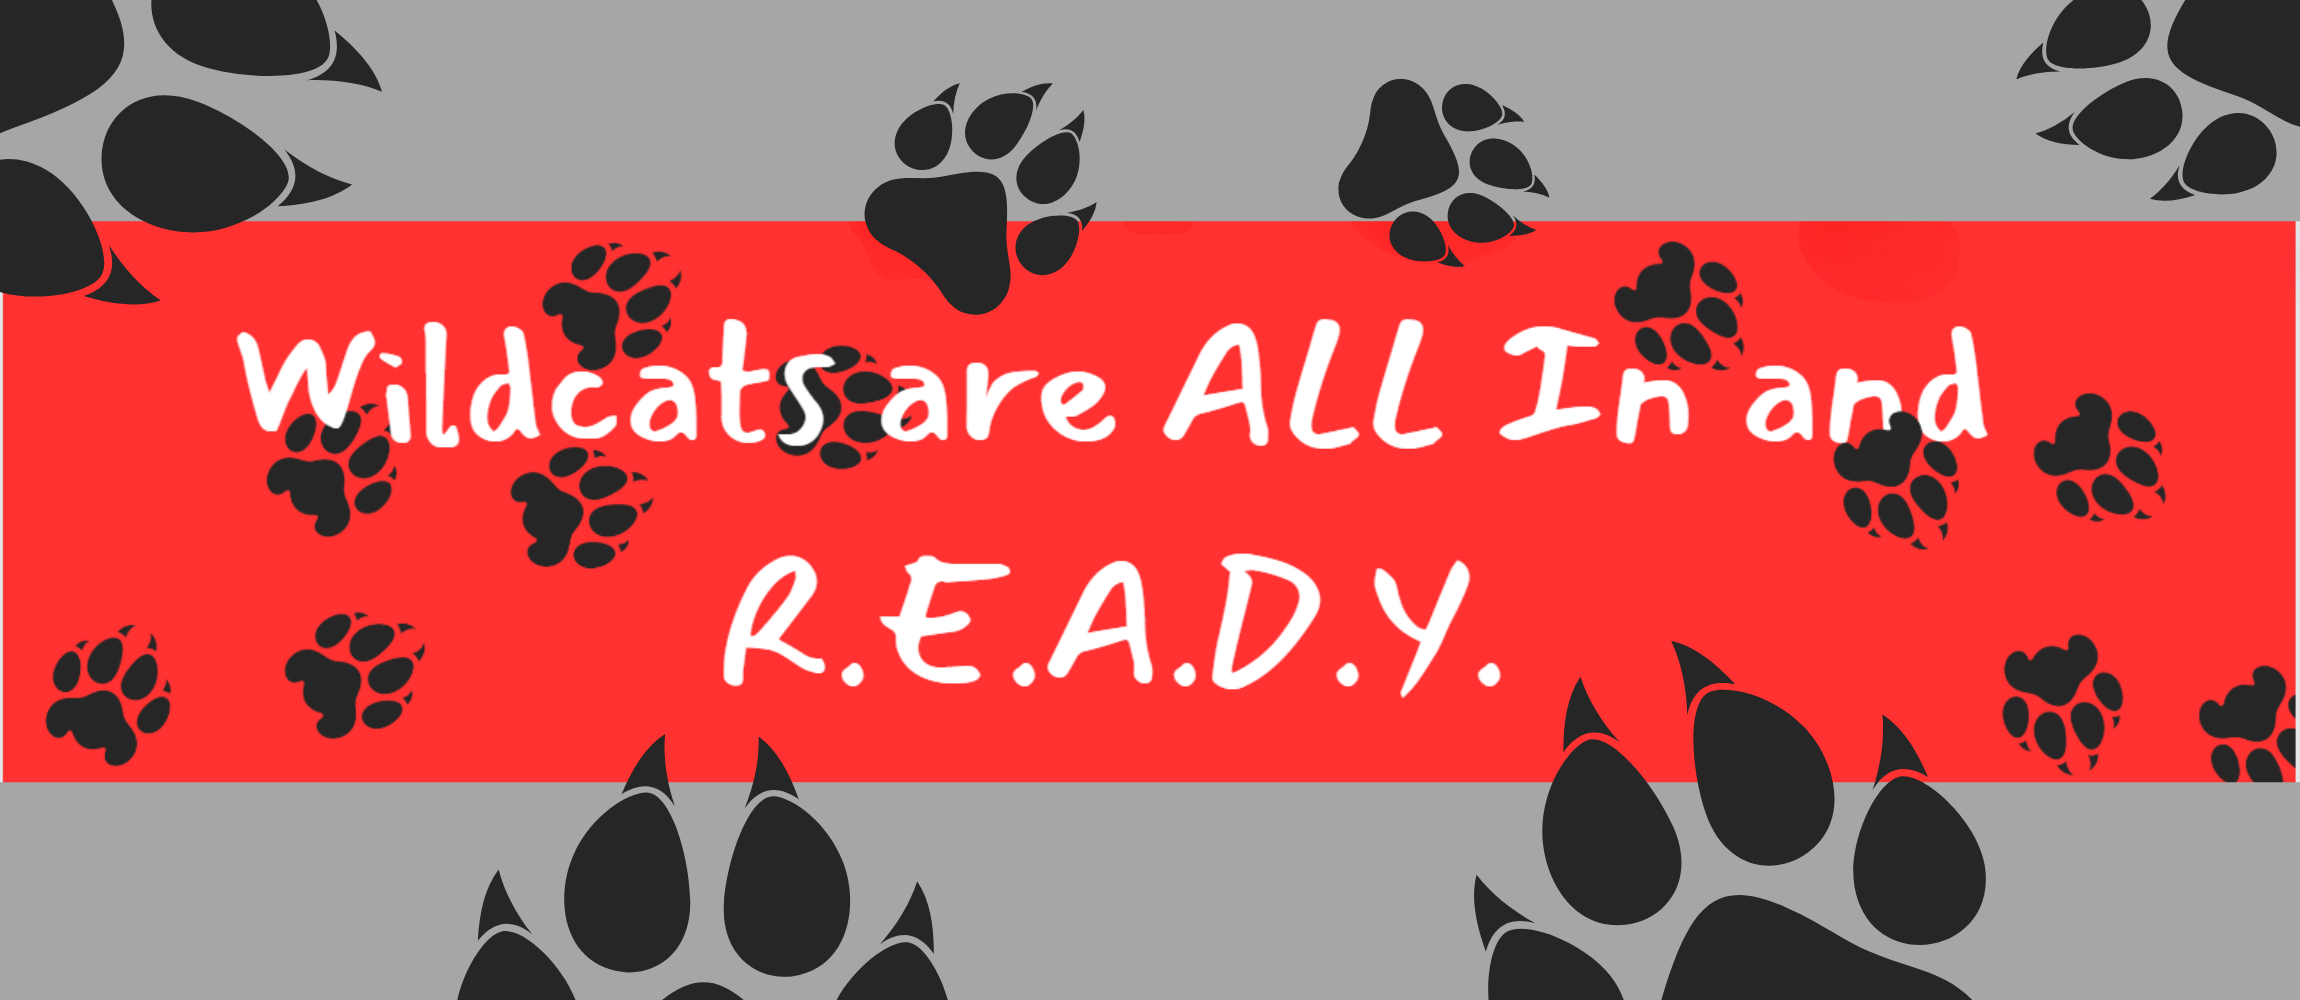 Red banner with text "WILDCATS ARE ALL IN AND READY"